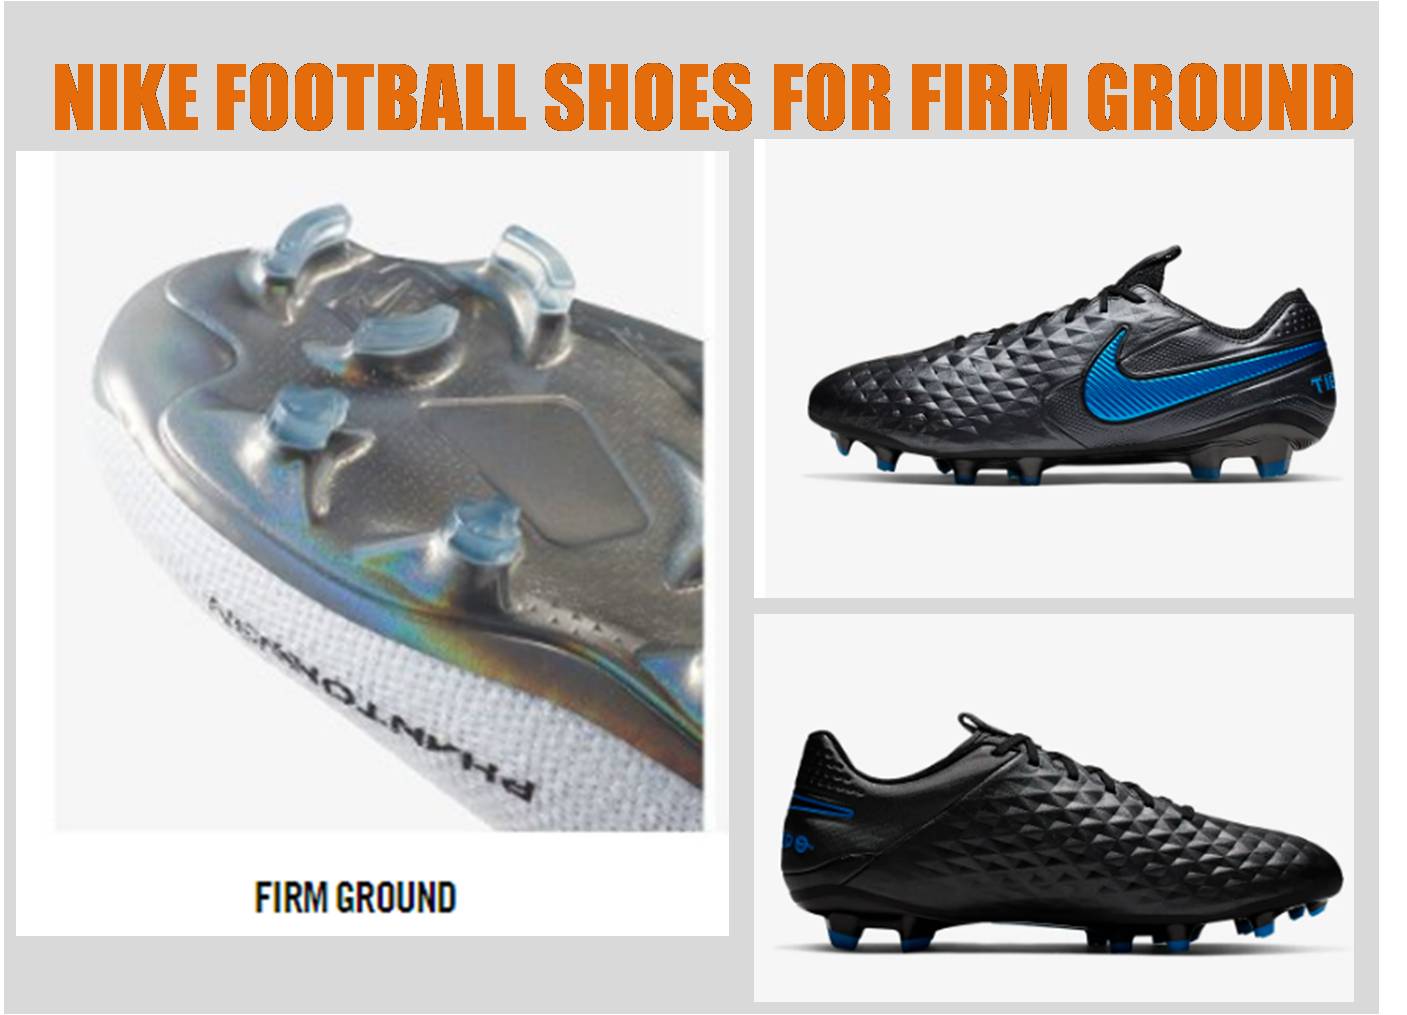 NIKE_FOOTBALL_SHOES_FOR_FIRM_GROUND.jpg